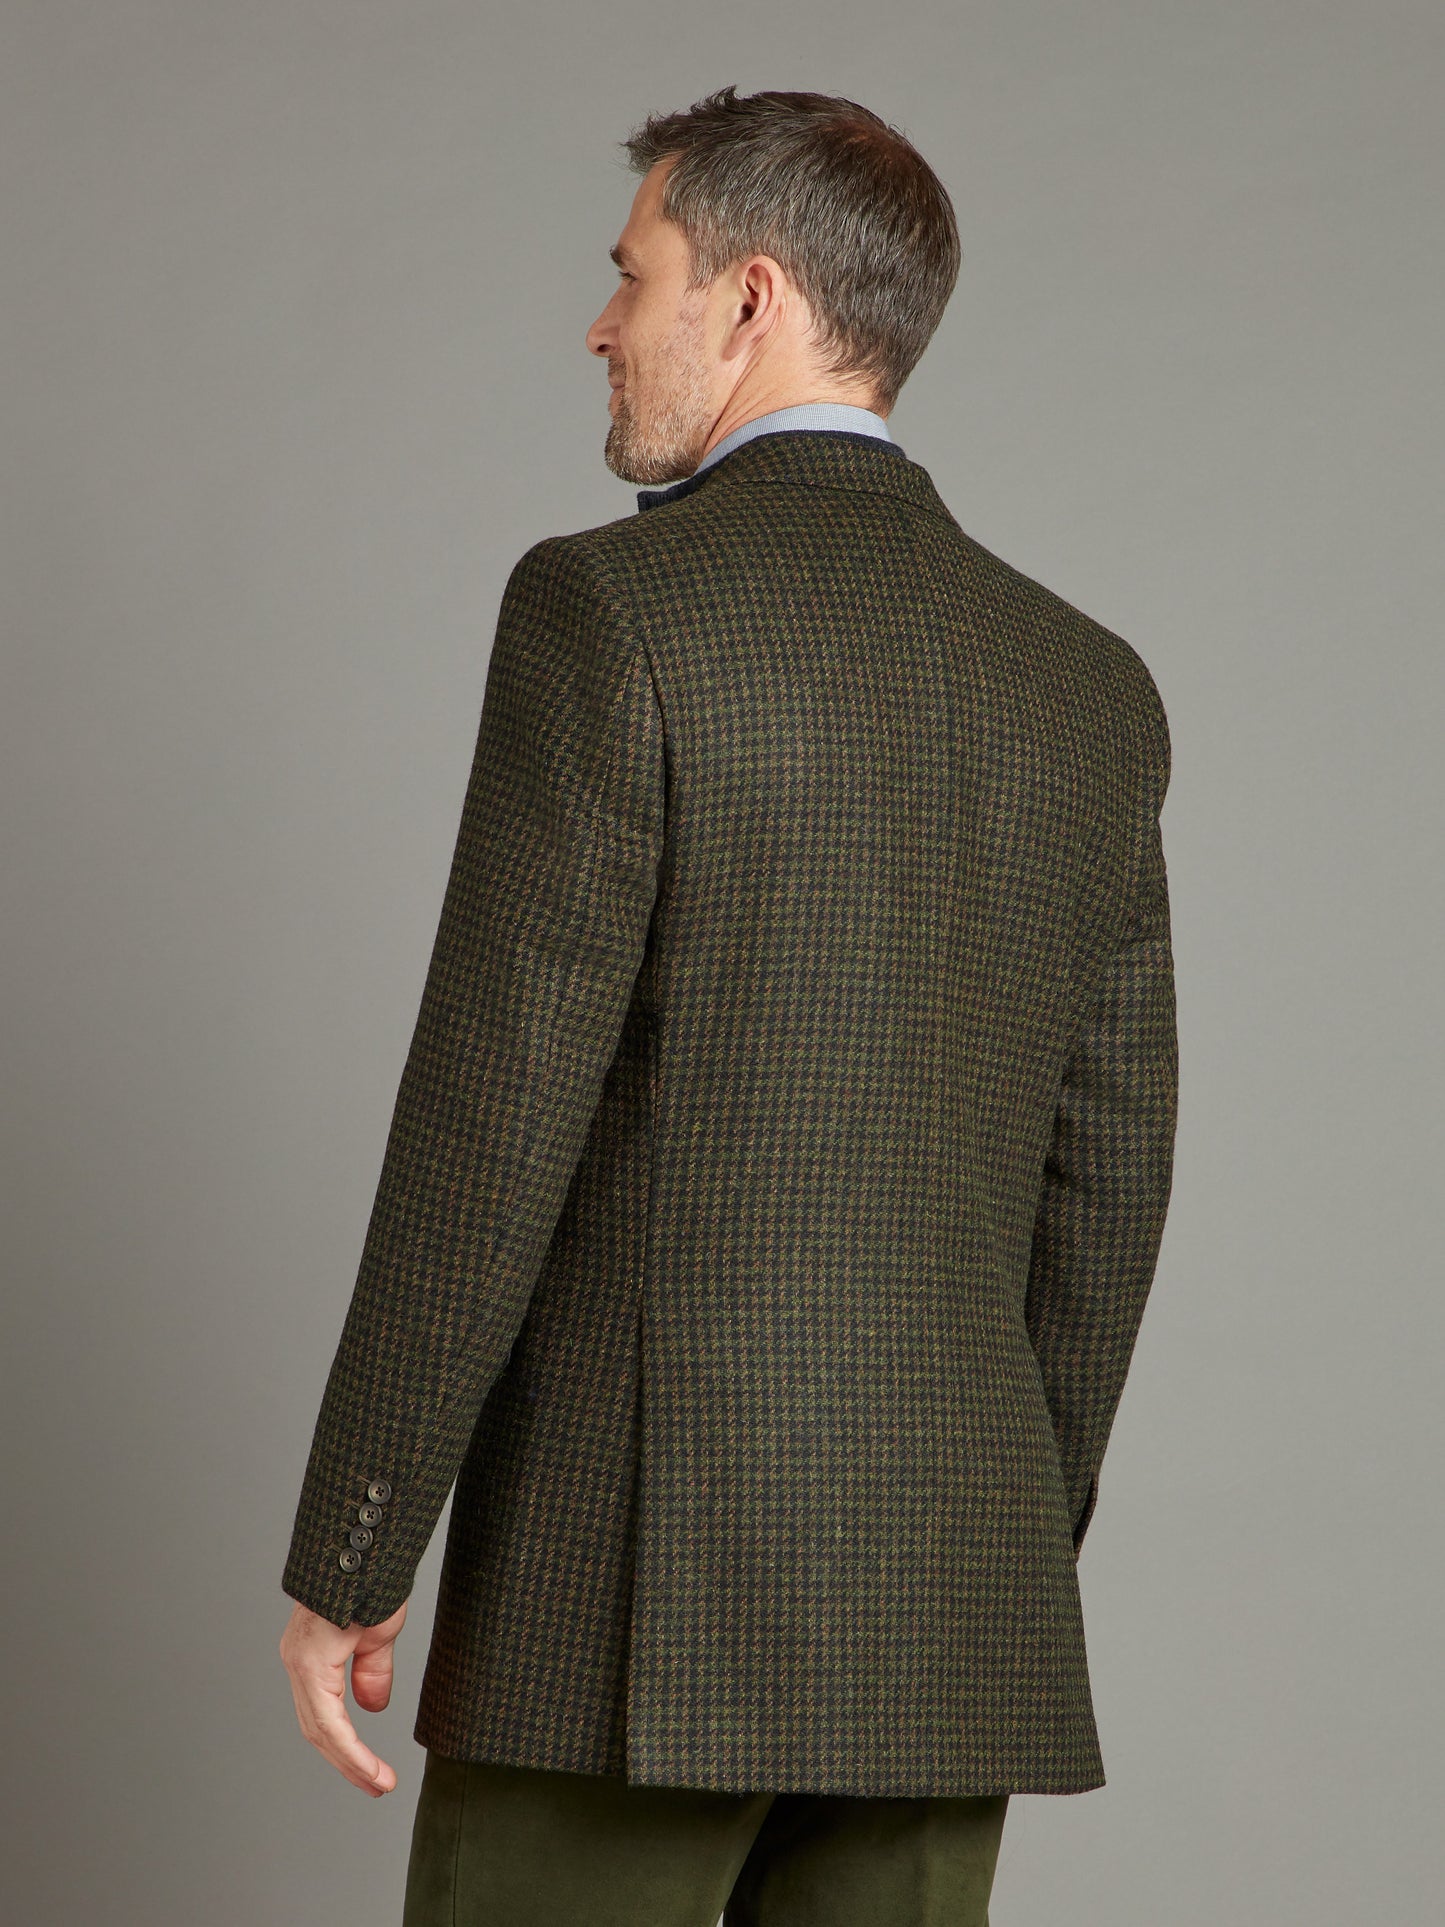 Eaton Jacket Houndstooth - Green/Brown